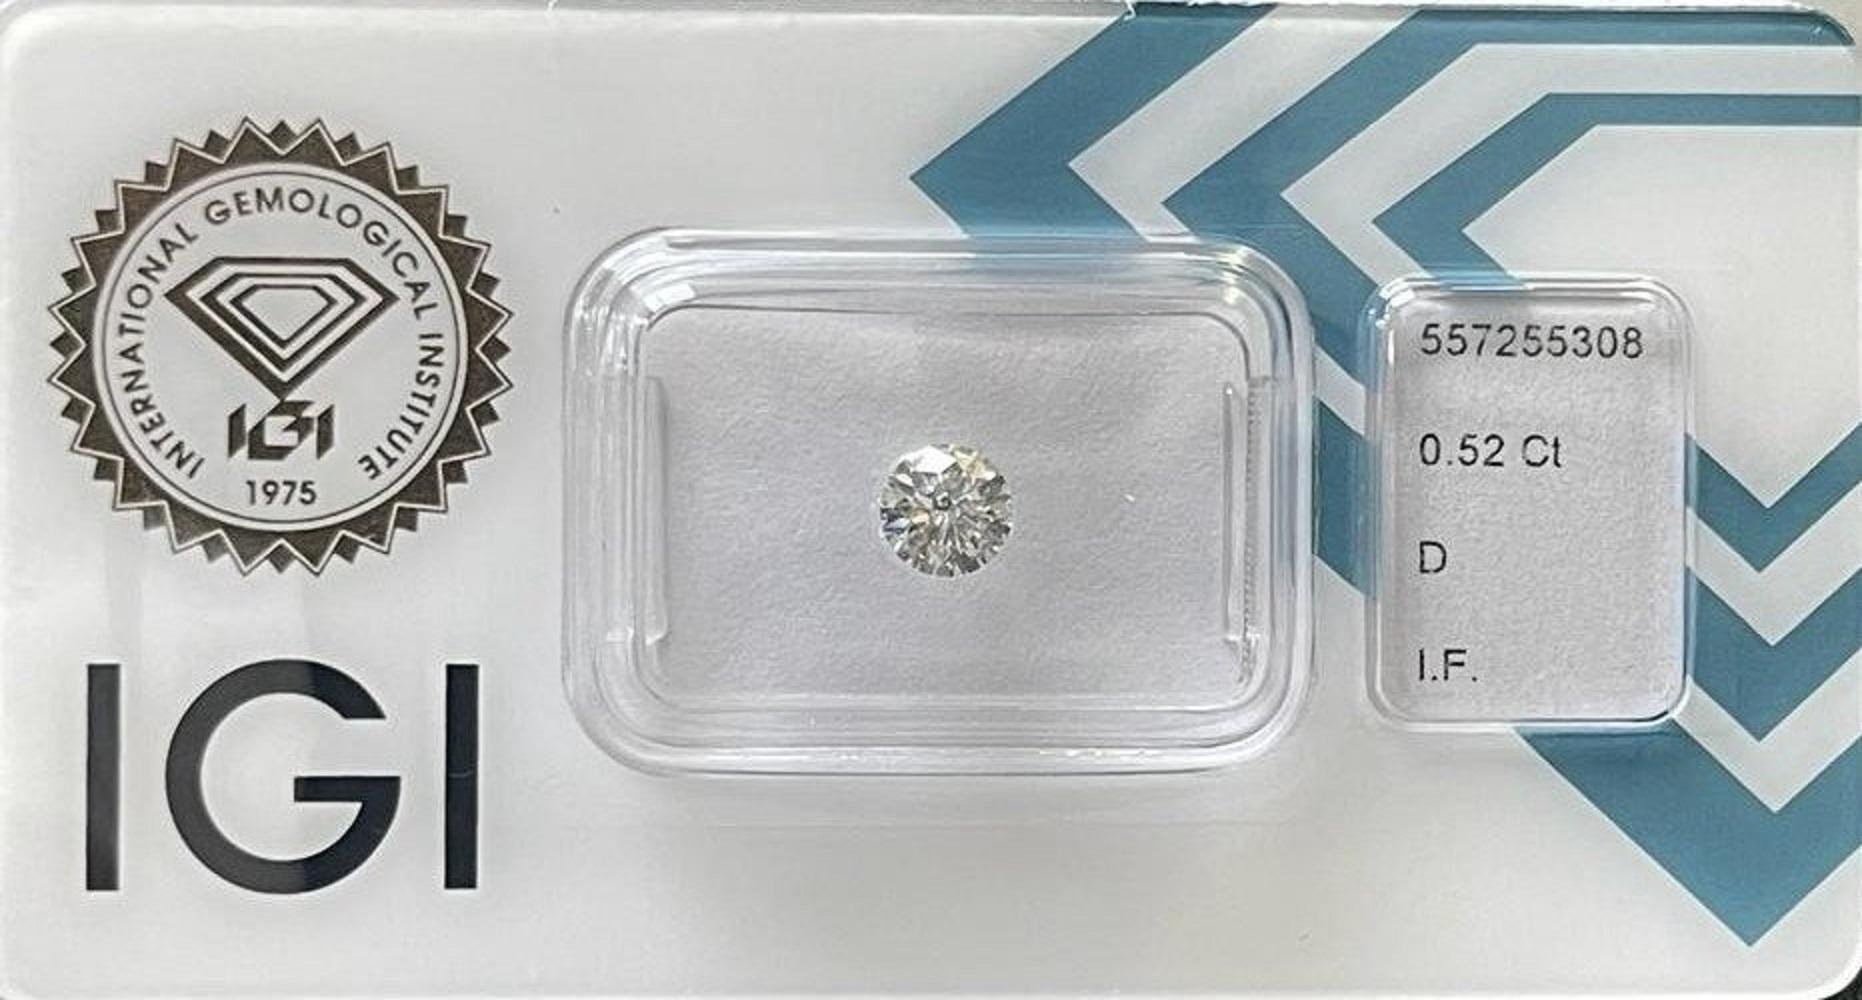 Sparkling 1pc Flawless Natural Diamond with 0.52 ct Round D IF IGI Certificate For Sale 1